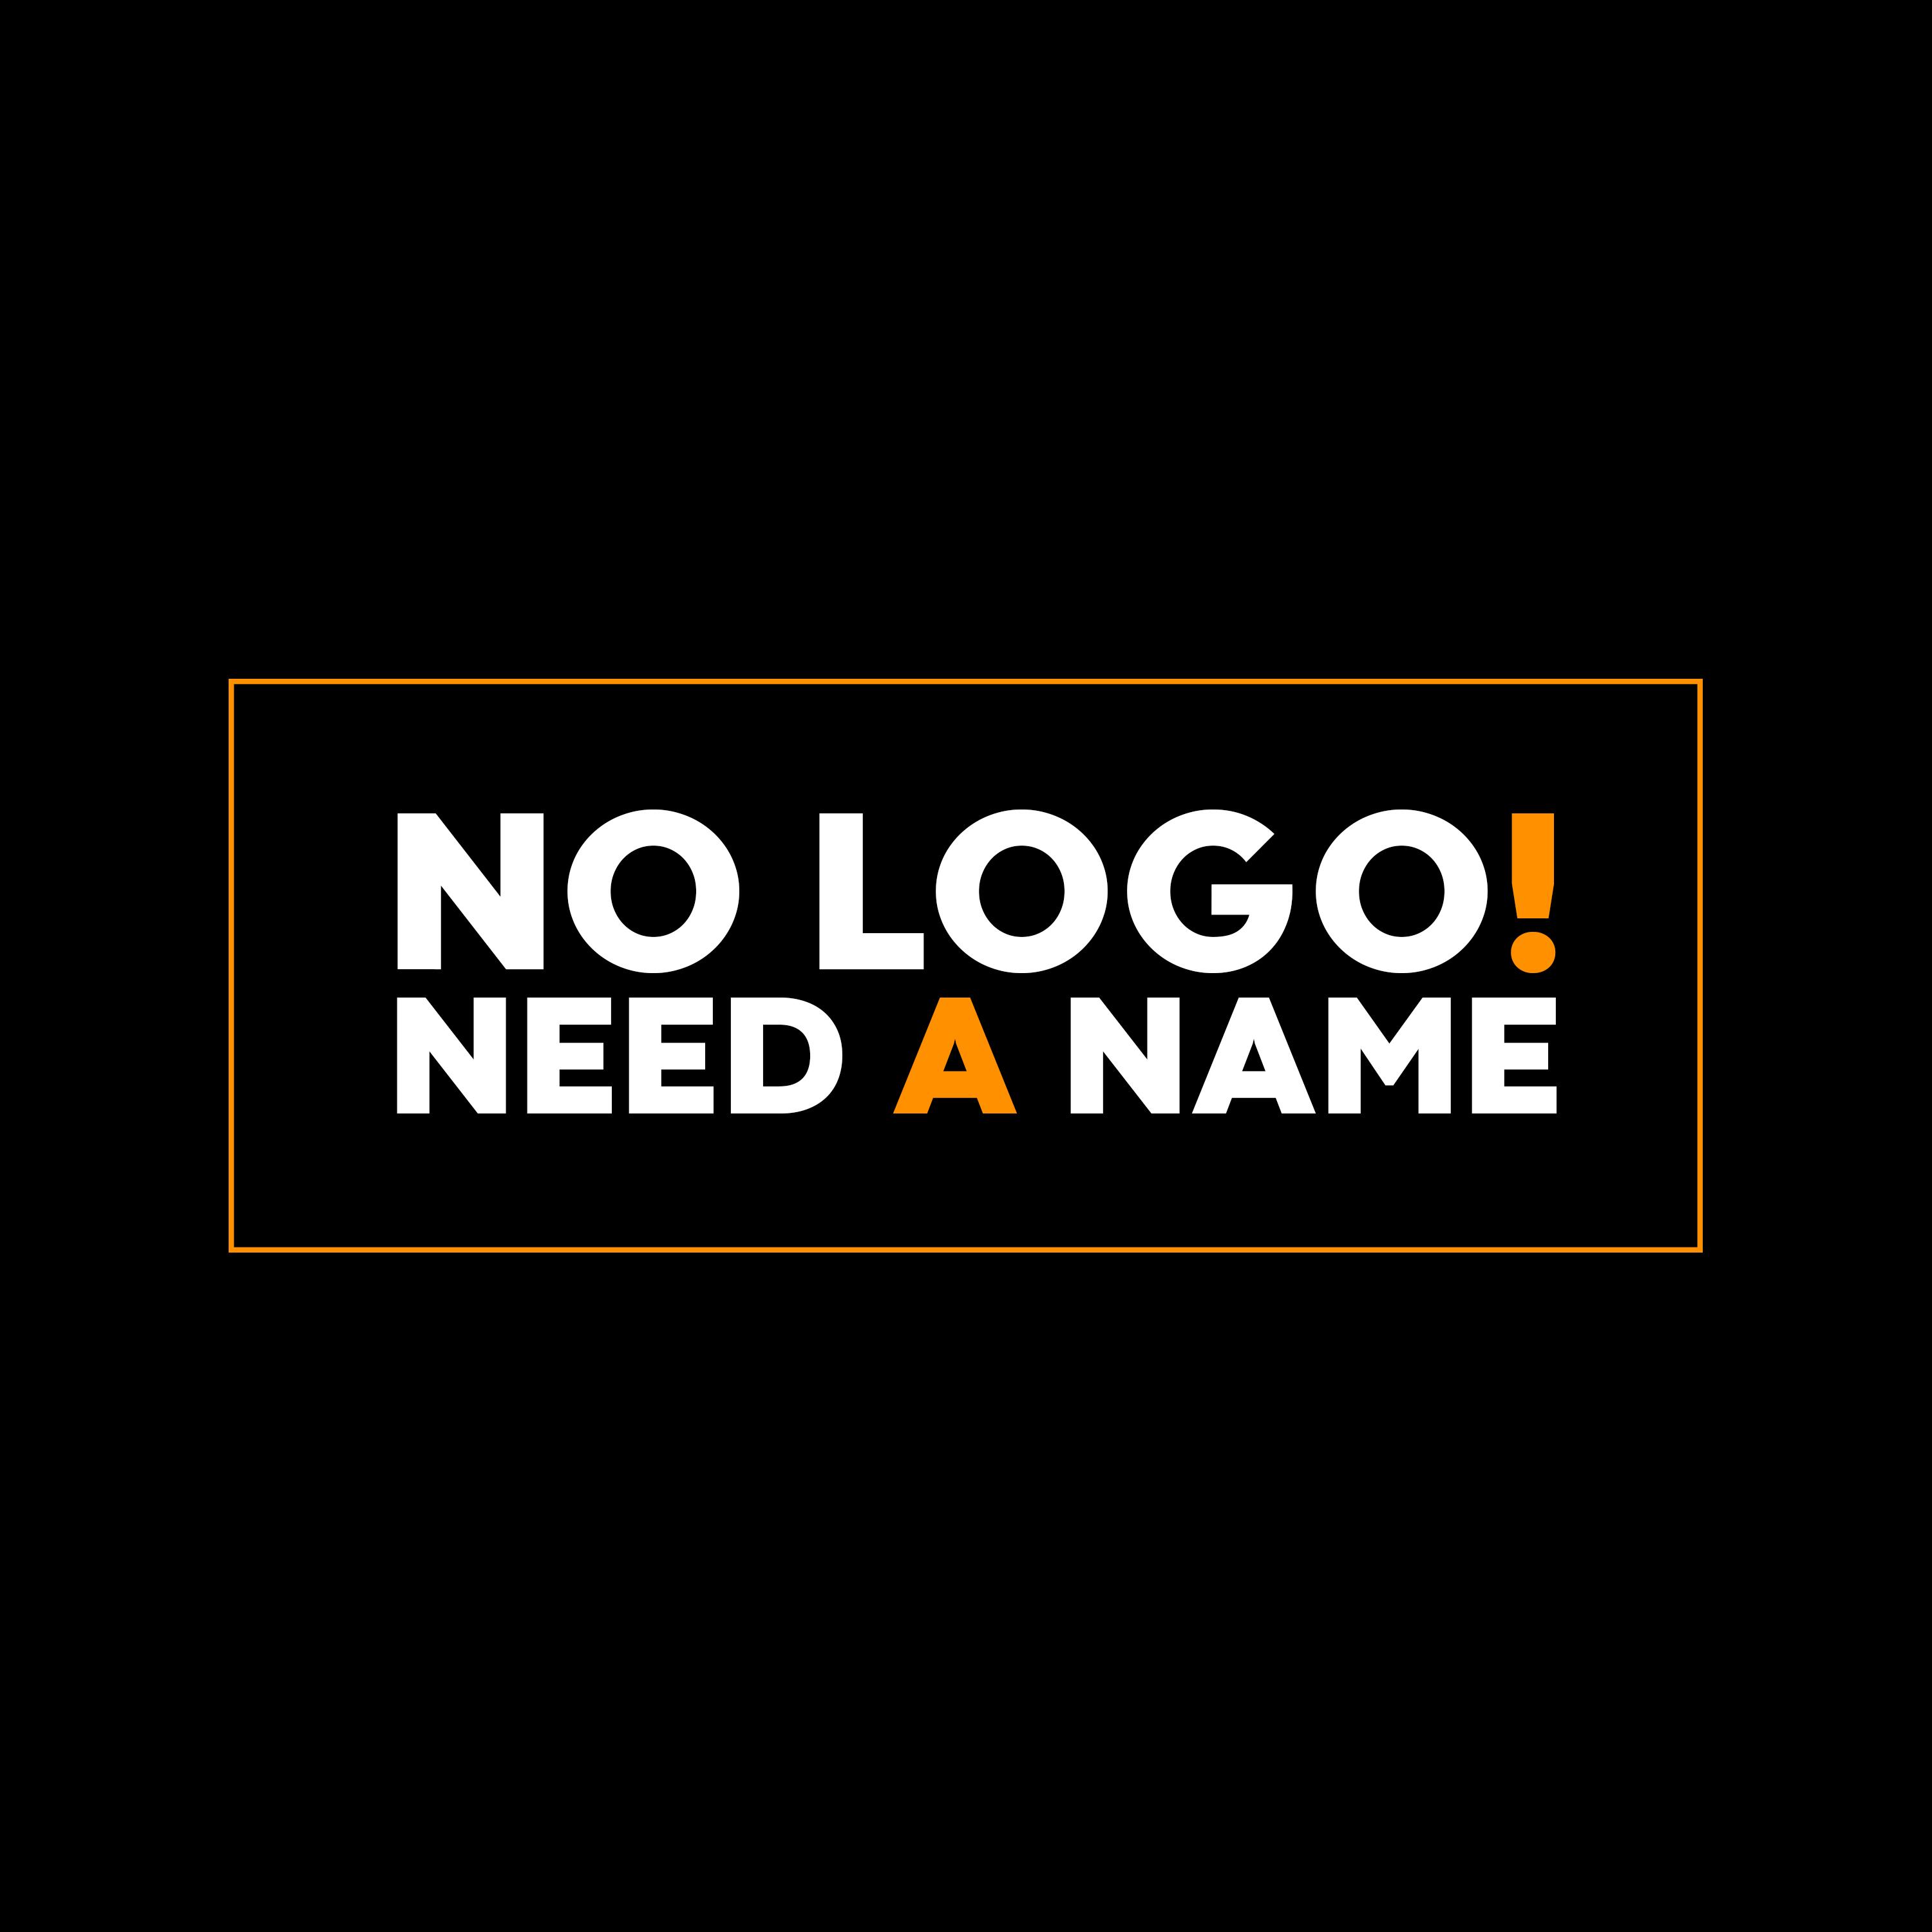 Need A Name - Digital Marketing Agency profile on Qualified.One